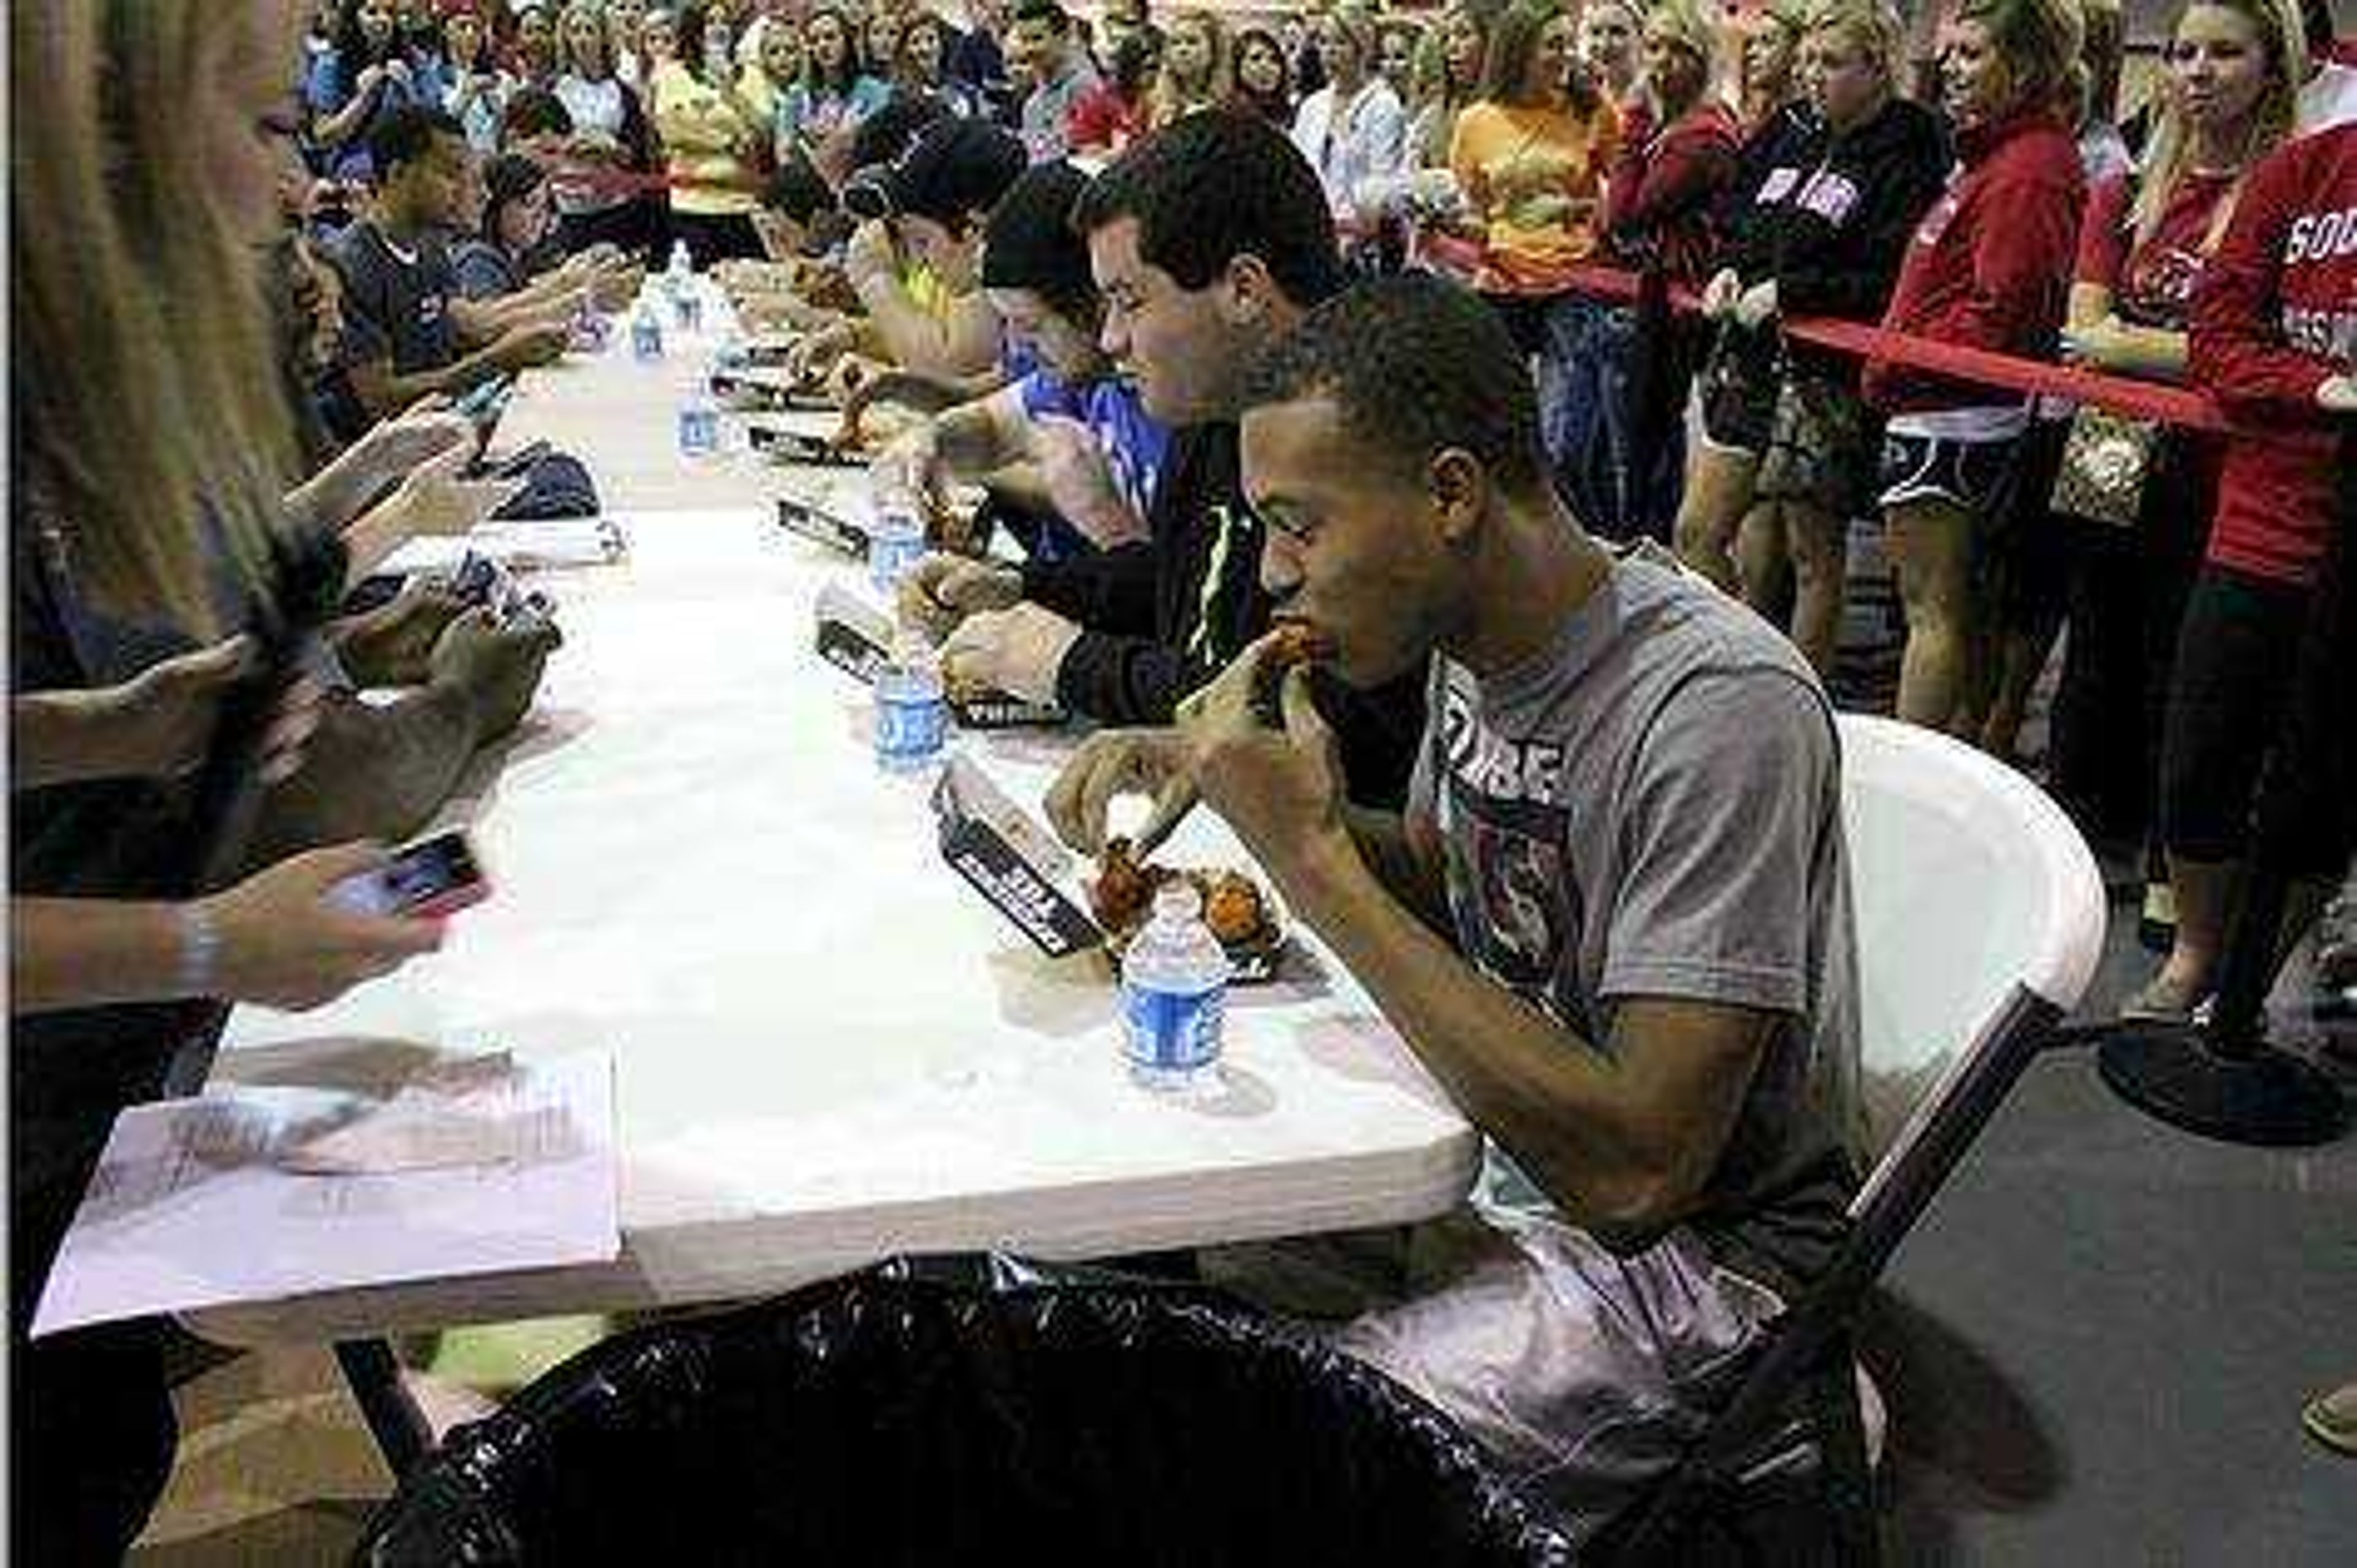 Student's participating in the Buffalo Wild Wings eating competition. Photo by Ashley Reed